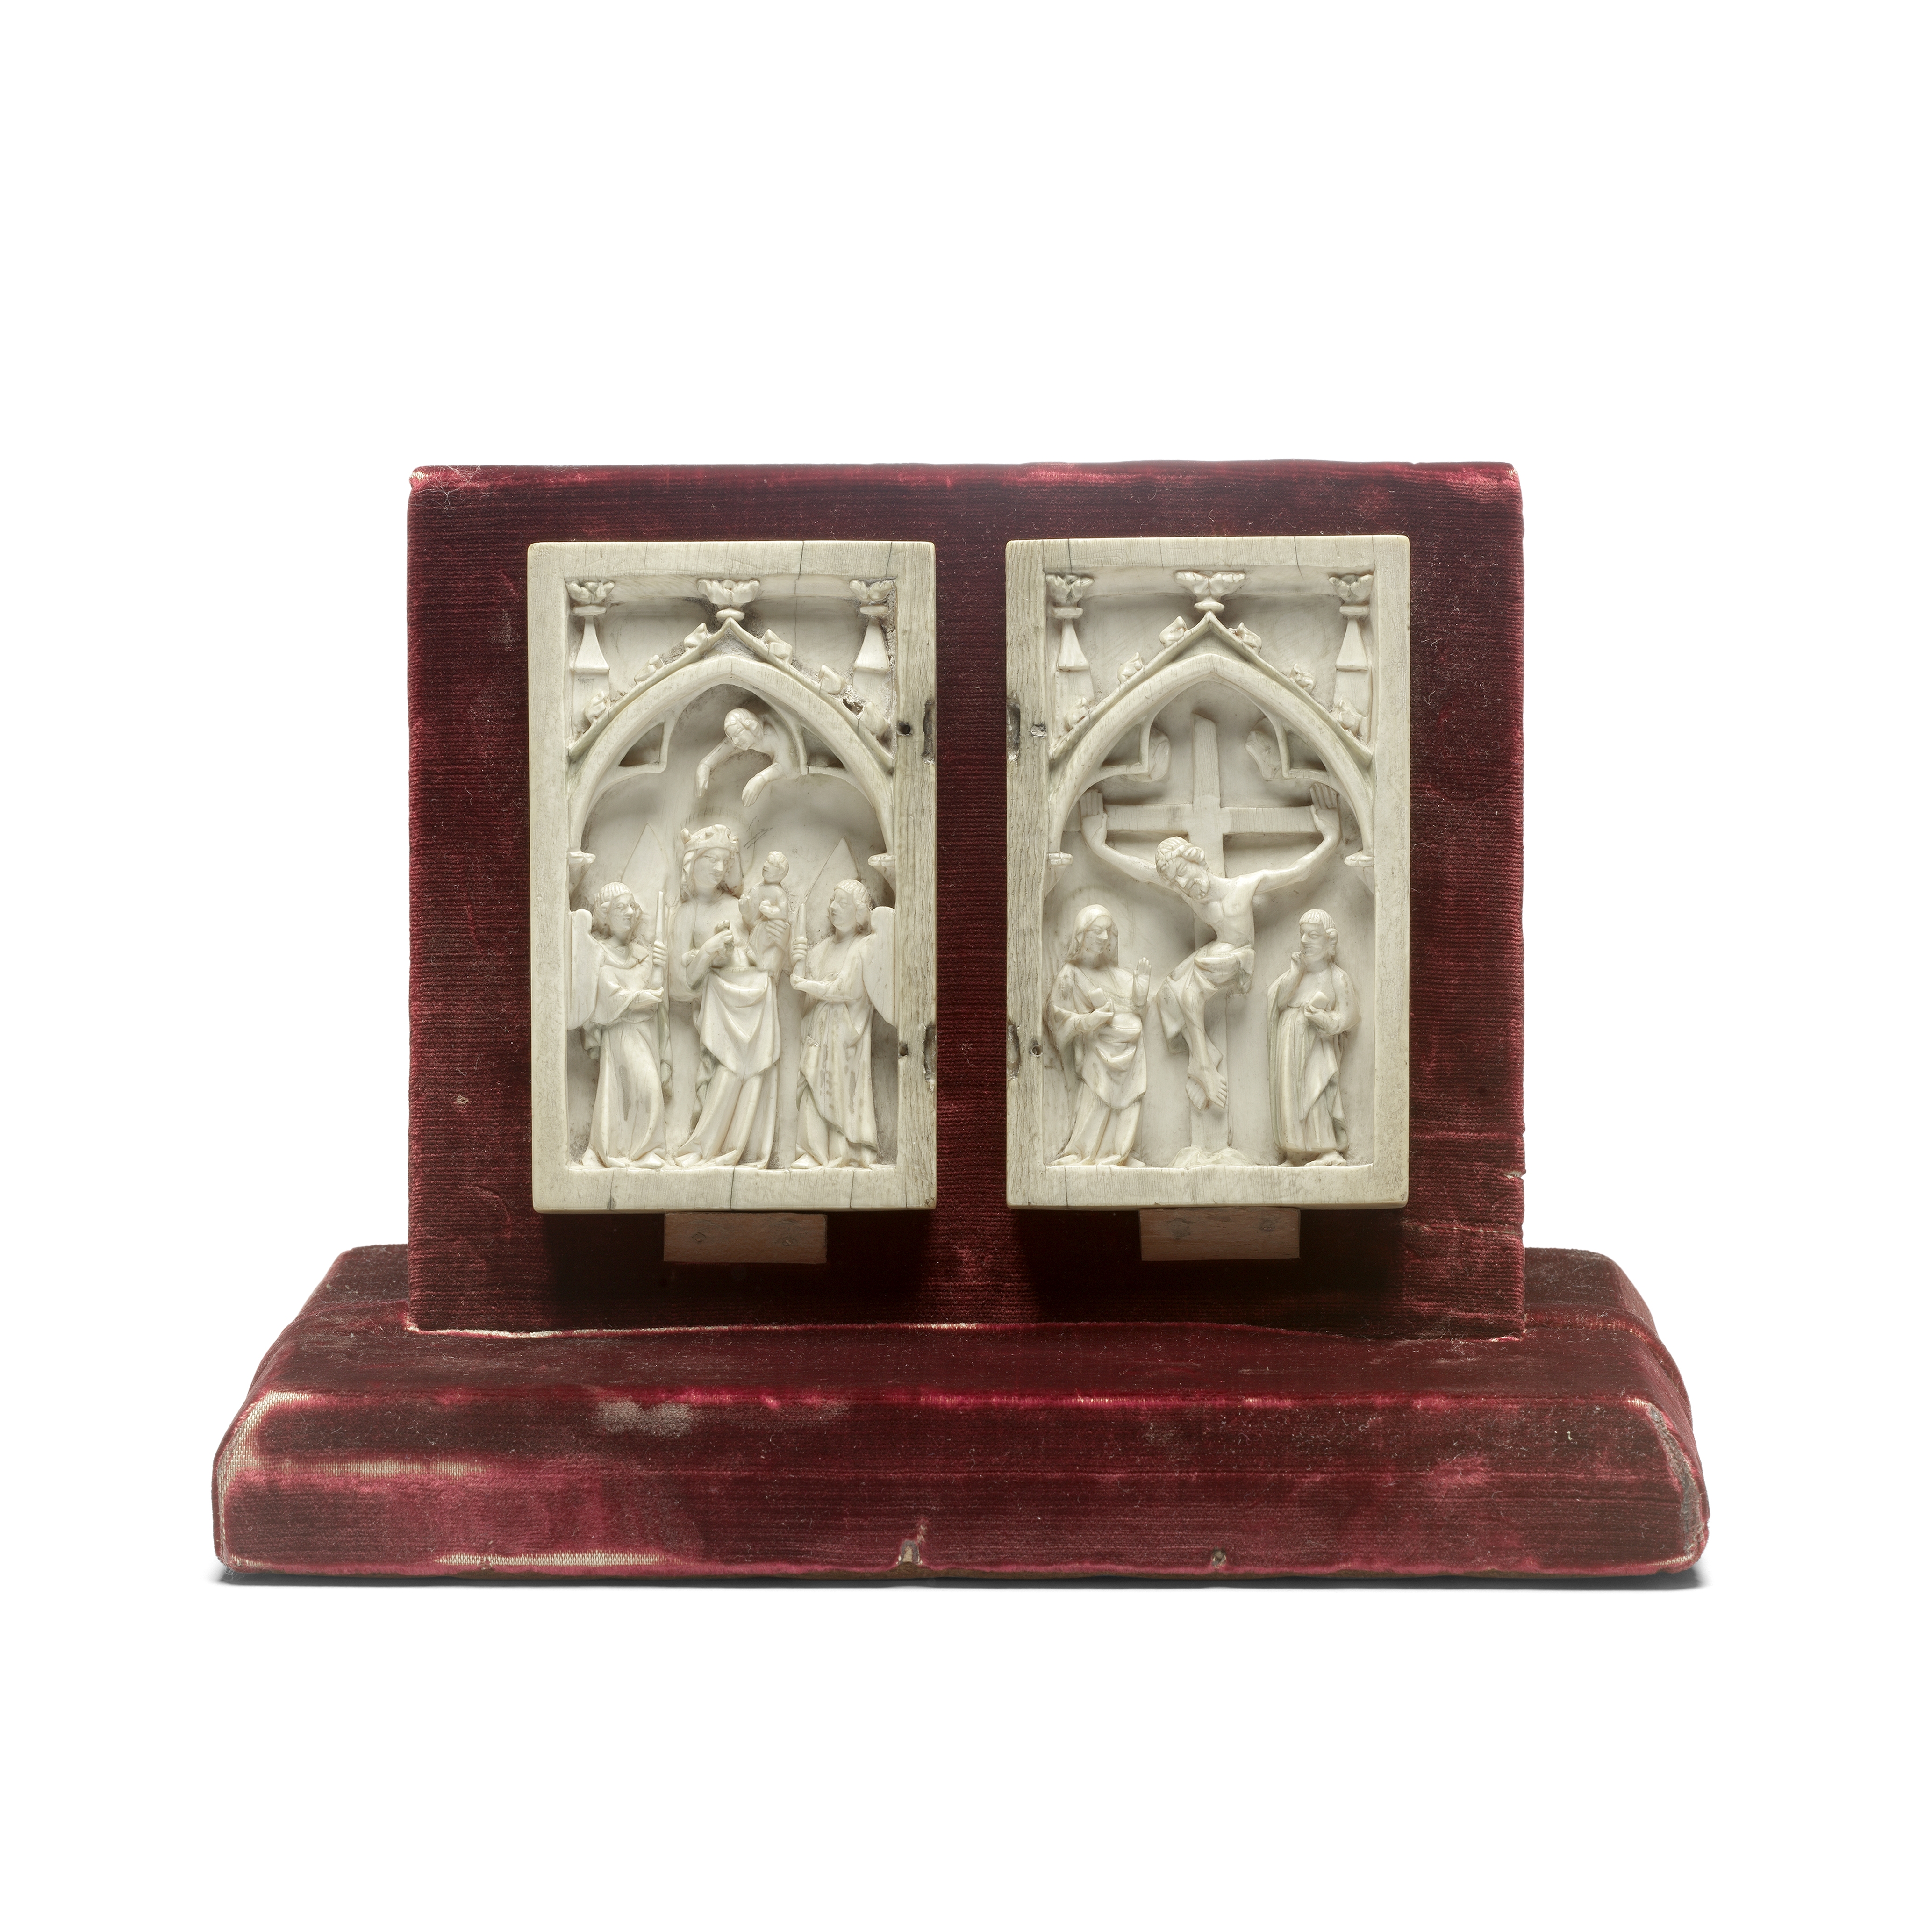 A rare 14th century French carved ivory diptych Circa 1330-1350, probably Paris